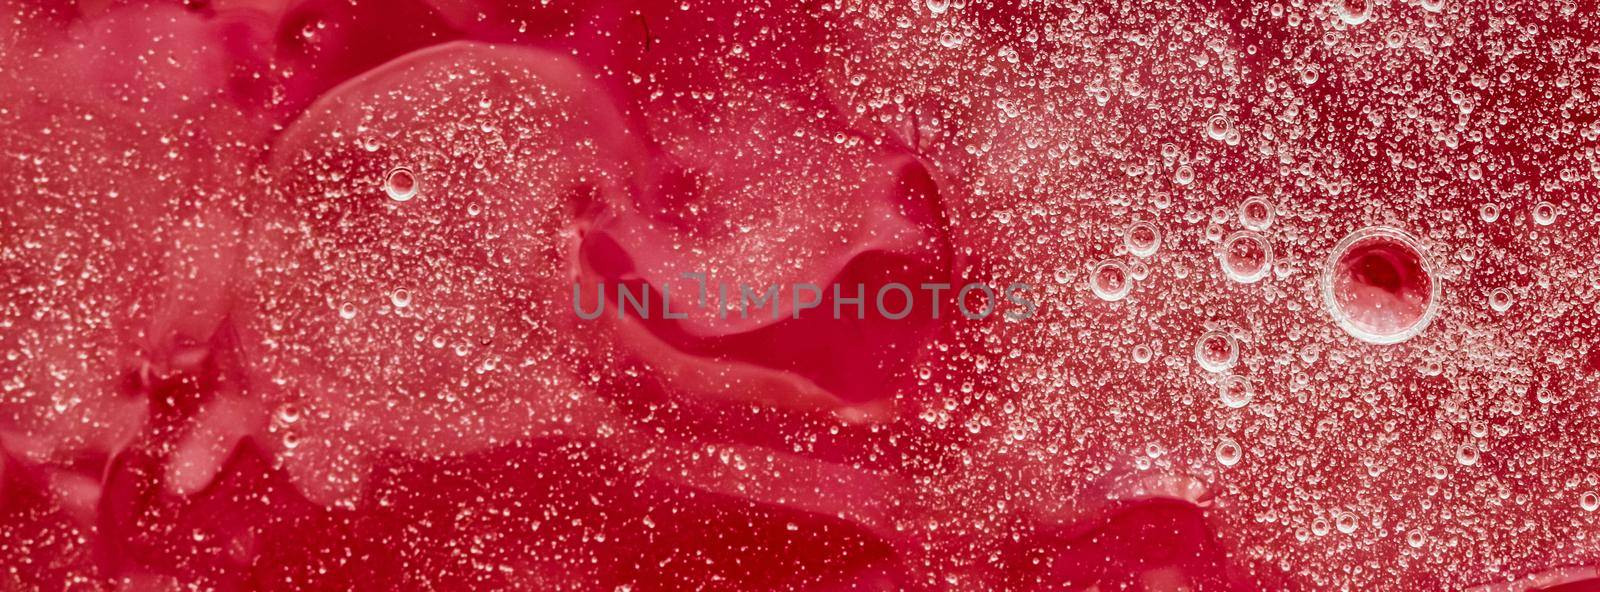 Abstract liquid banner background, paint splash, swirl pattern and water drops, beauty gel and cosmetic texture, contemporary magic art and science as luxury flatlay design.